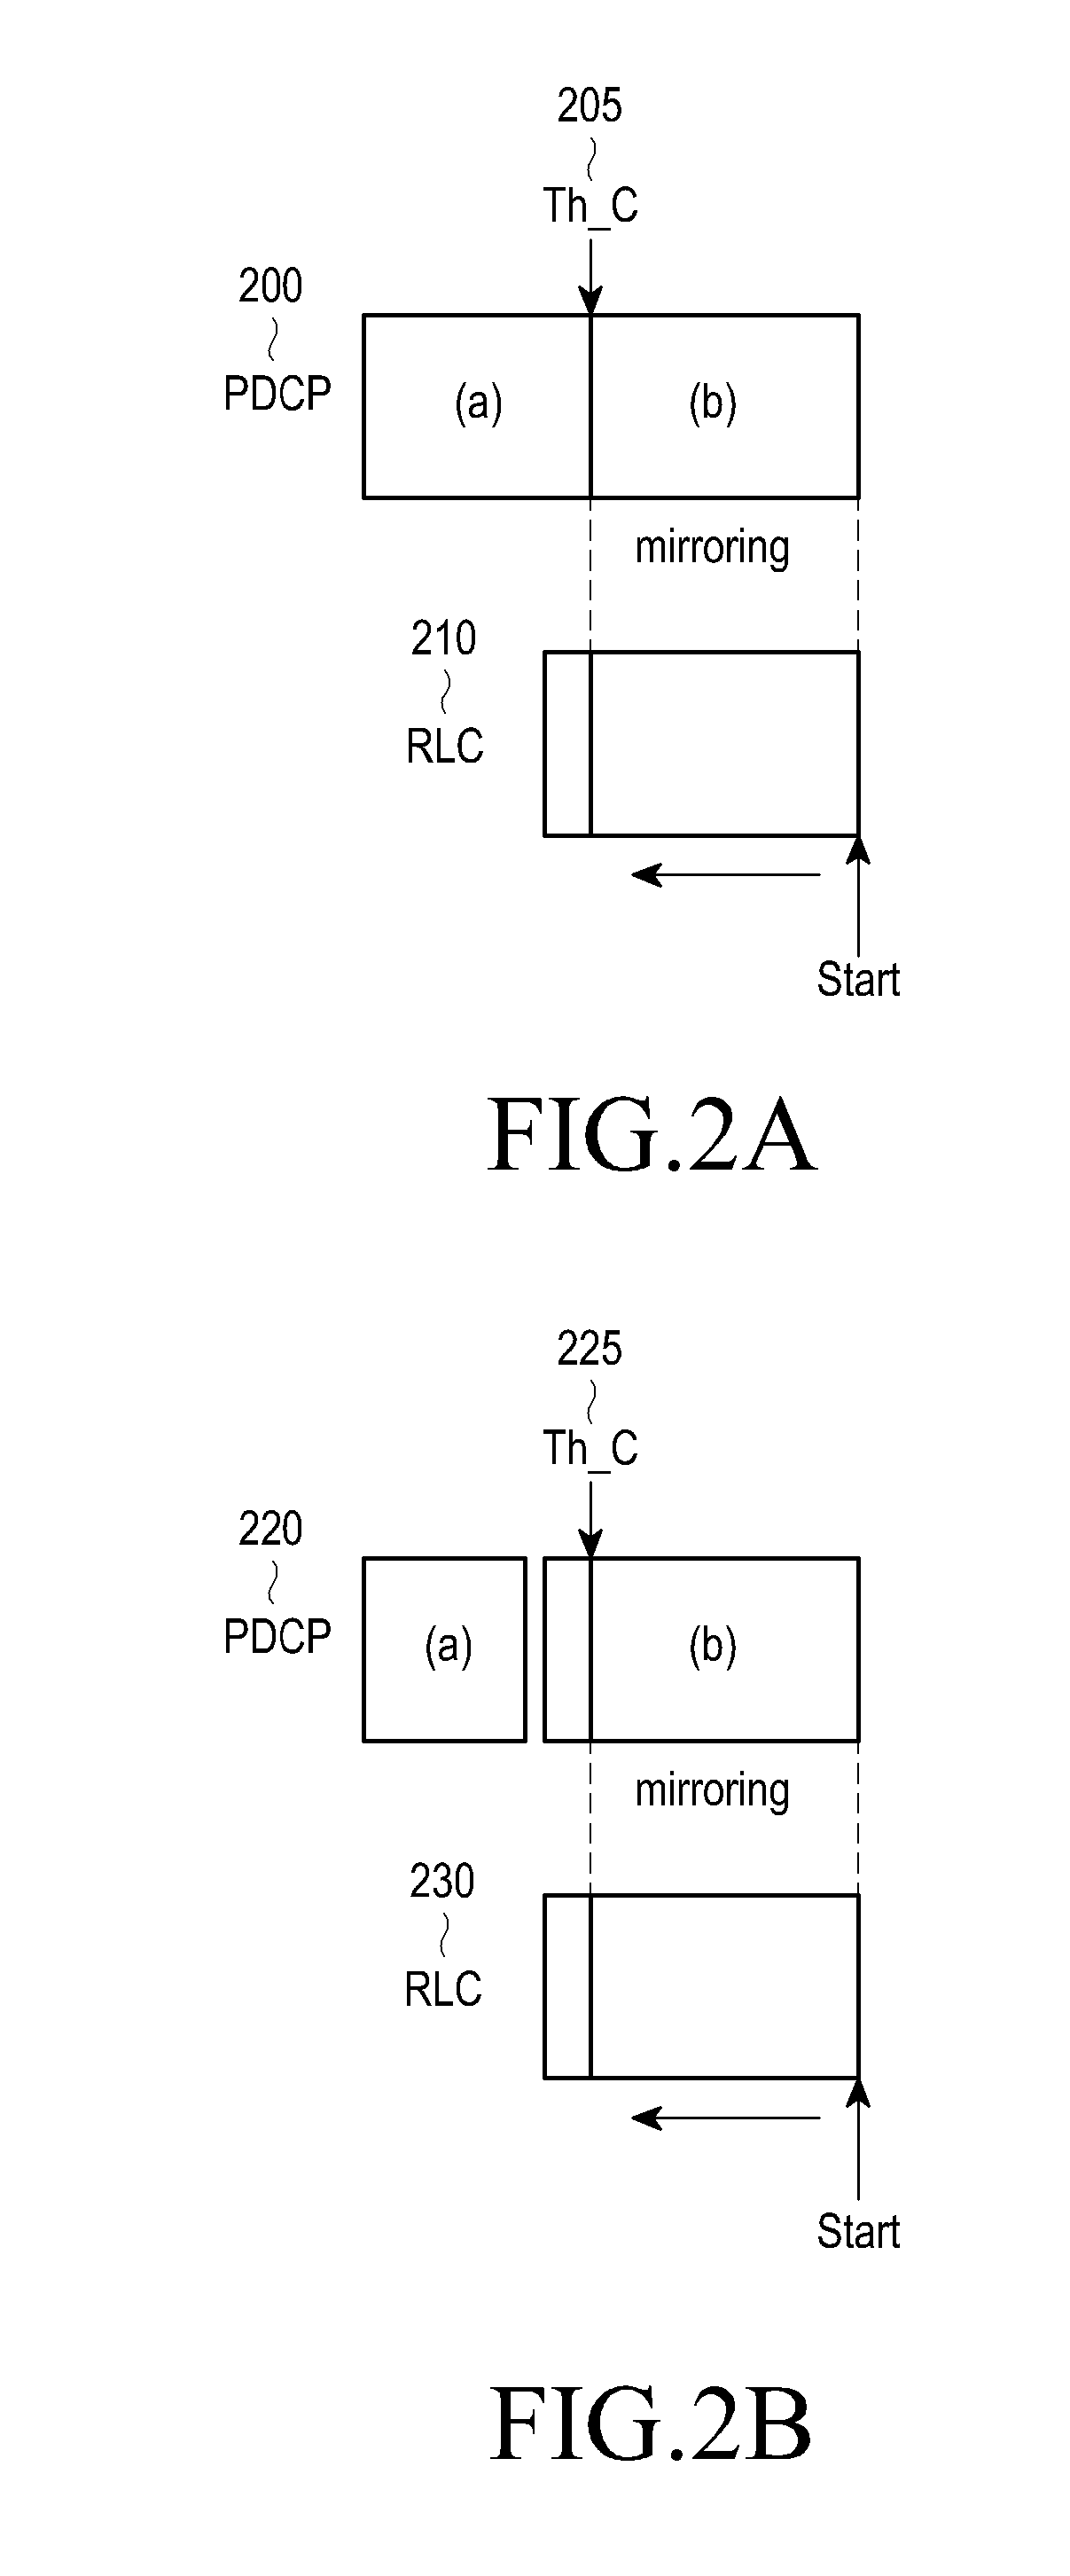 Method and apparatus for flow control between RLC and pdcp in a communication